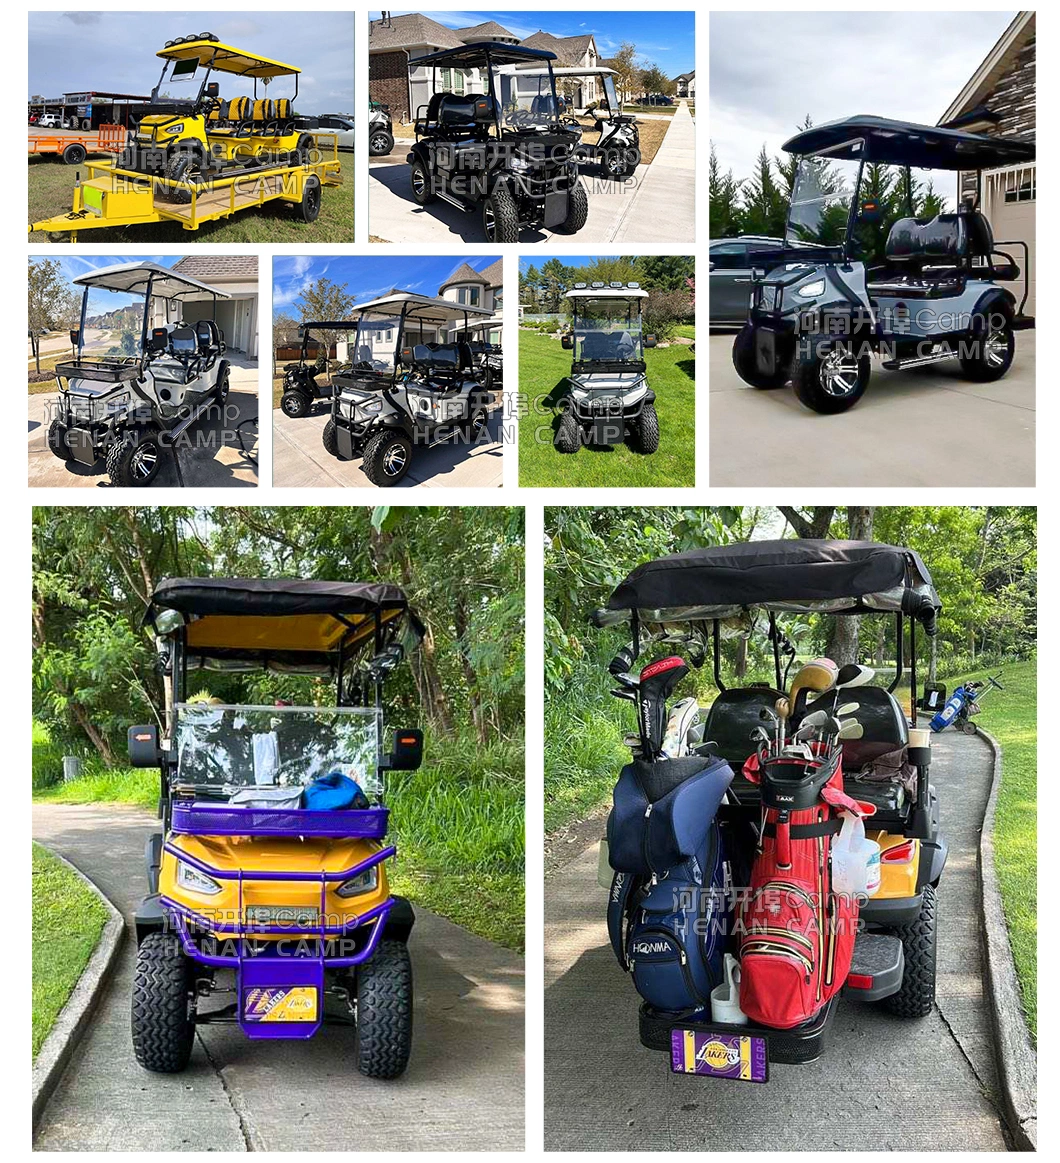 Henan Camp High Performance 72V Electric Lifted Golf Cart Gas 6 Passenger Electric Club Car Golf Cart for Adults